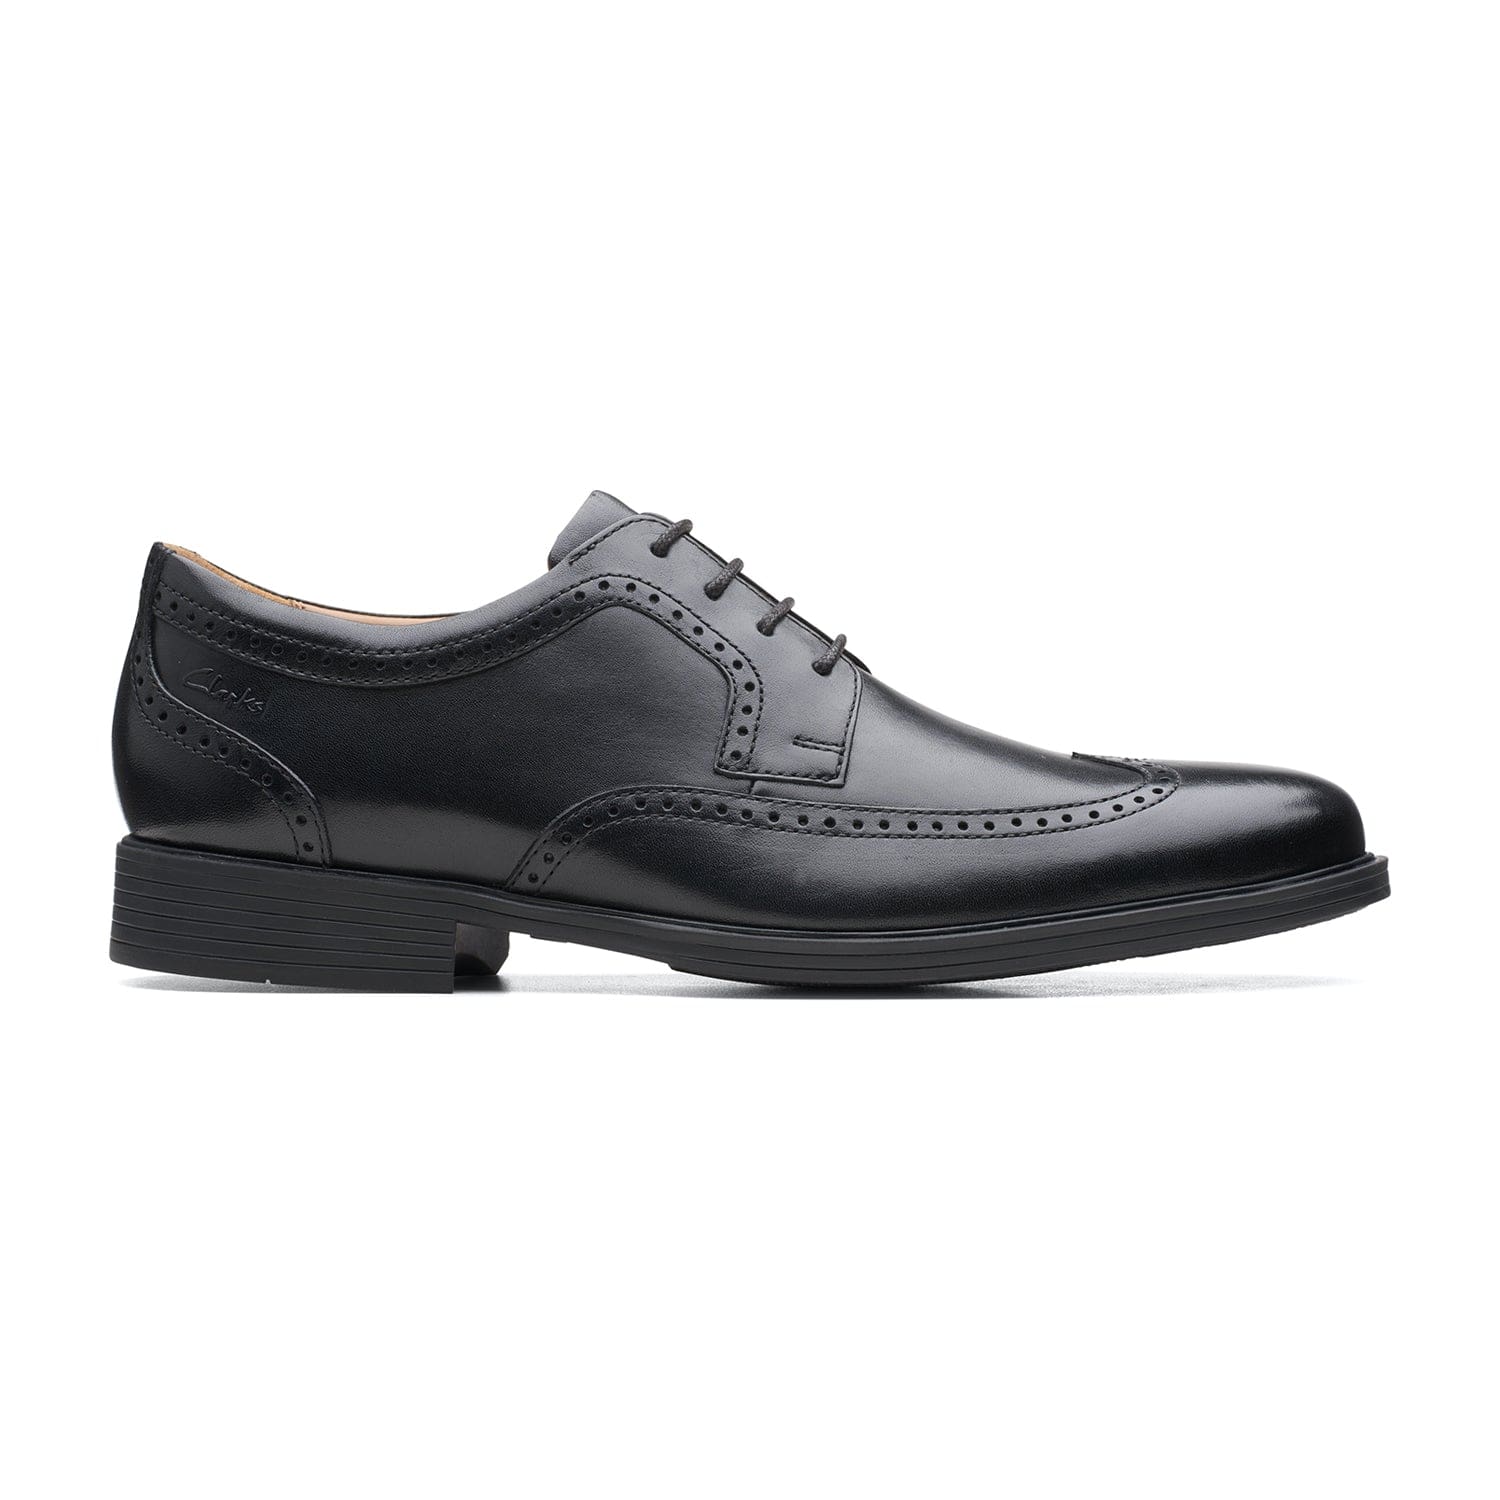 Clarks Whiddon Wing Shoes - Black Leather - 261580098 H Width (Wide Fit)